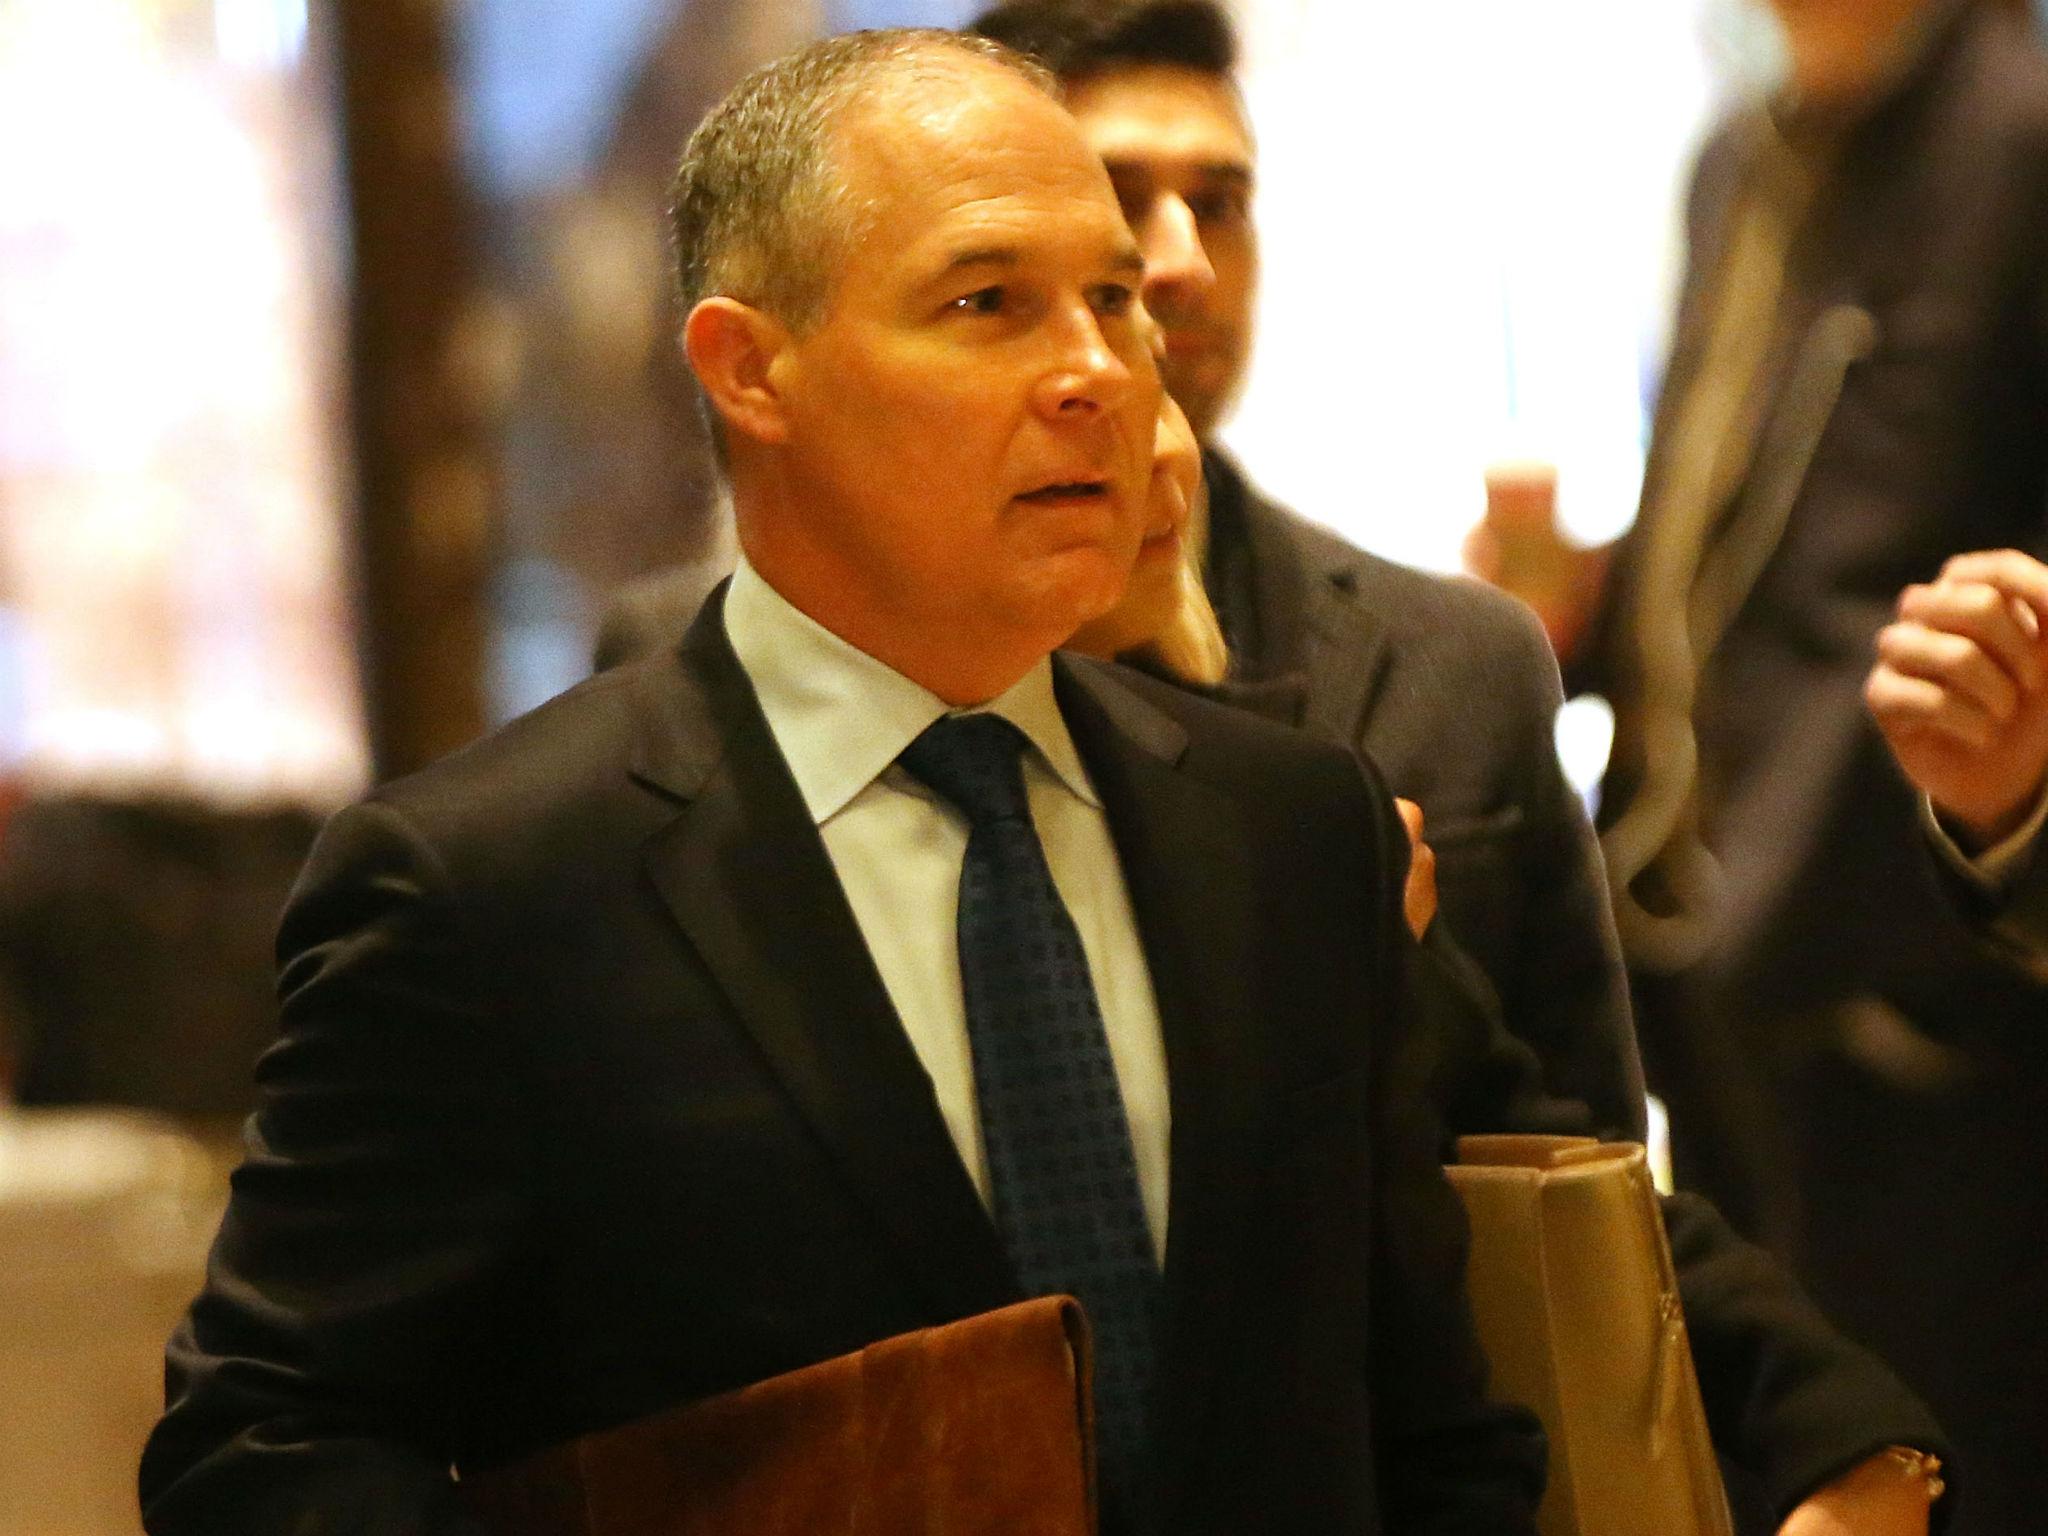 The pamphlet announcement follows Scott Pruitt's nomination to be head of the EPA